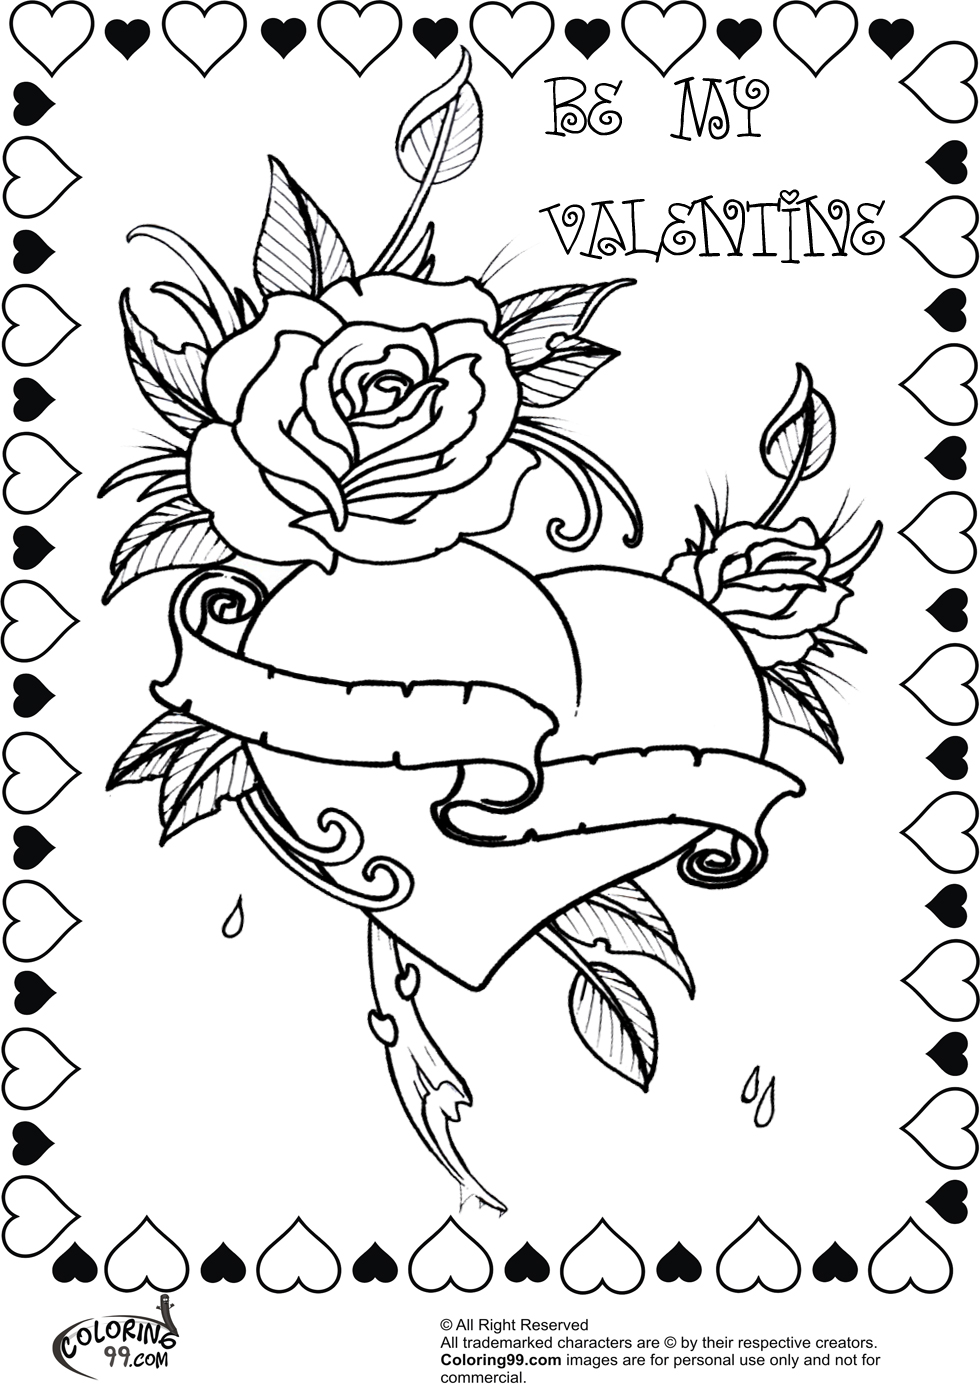 Printable Valentines Day Cards To Color For Adults